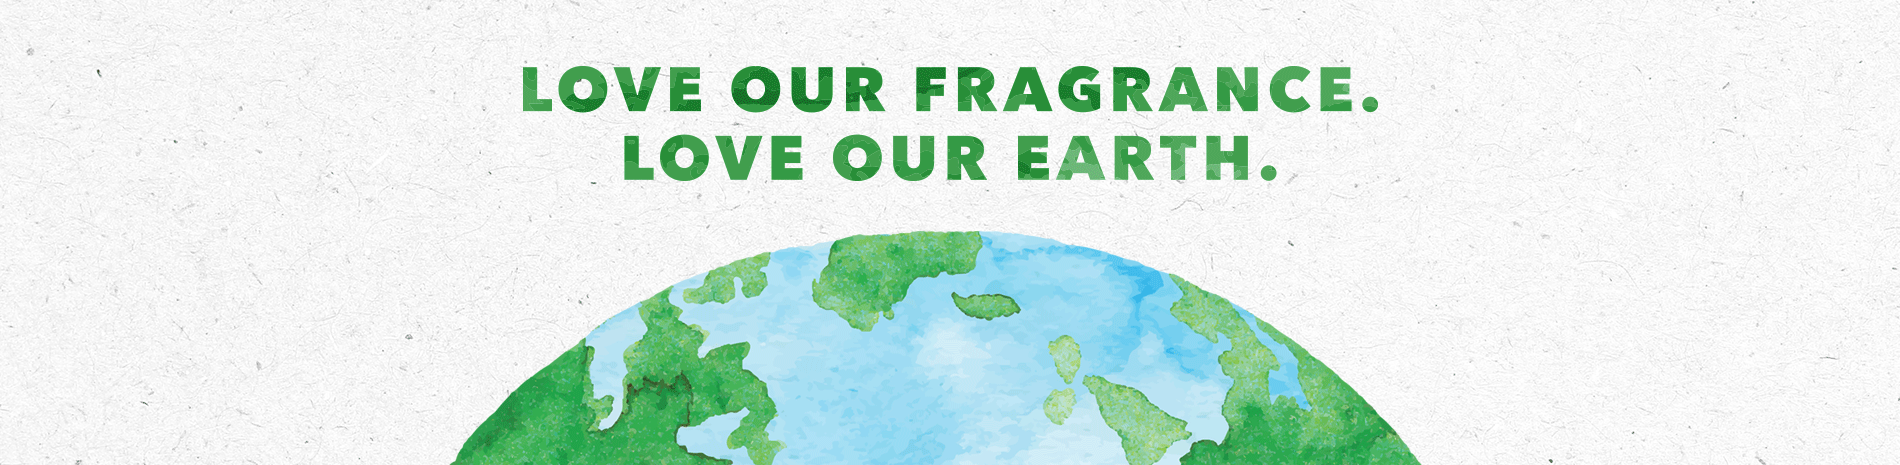 love our fragrance, love our earth animation